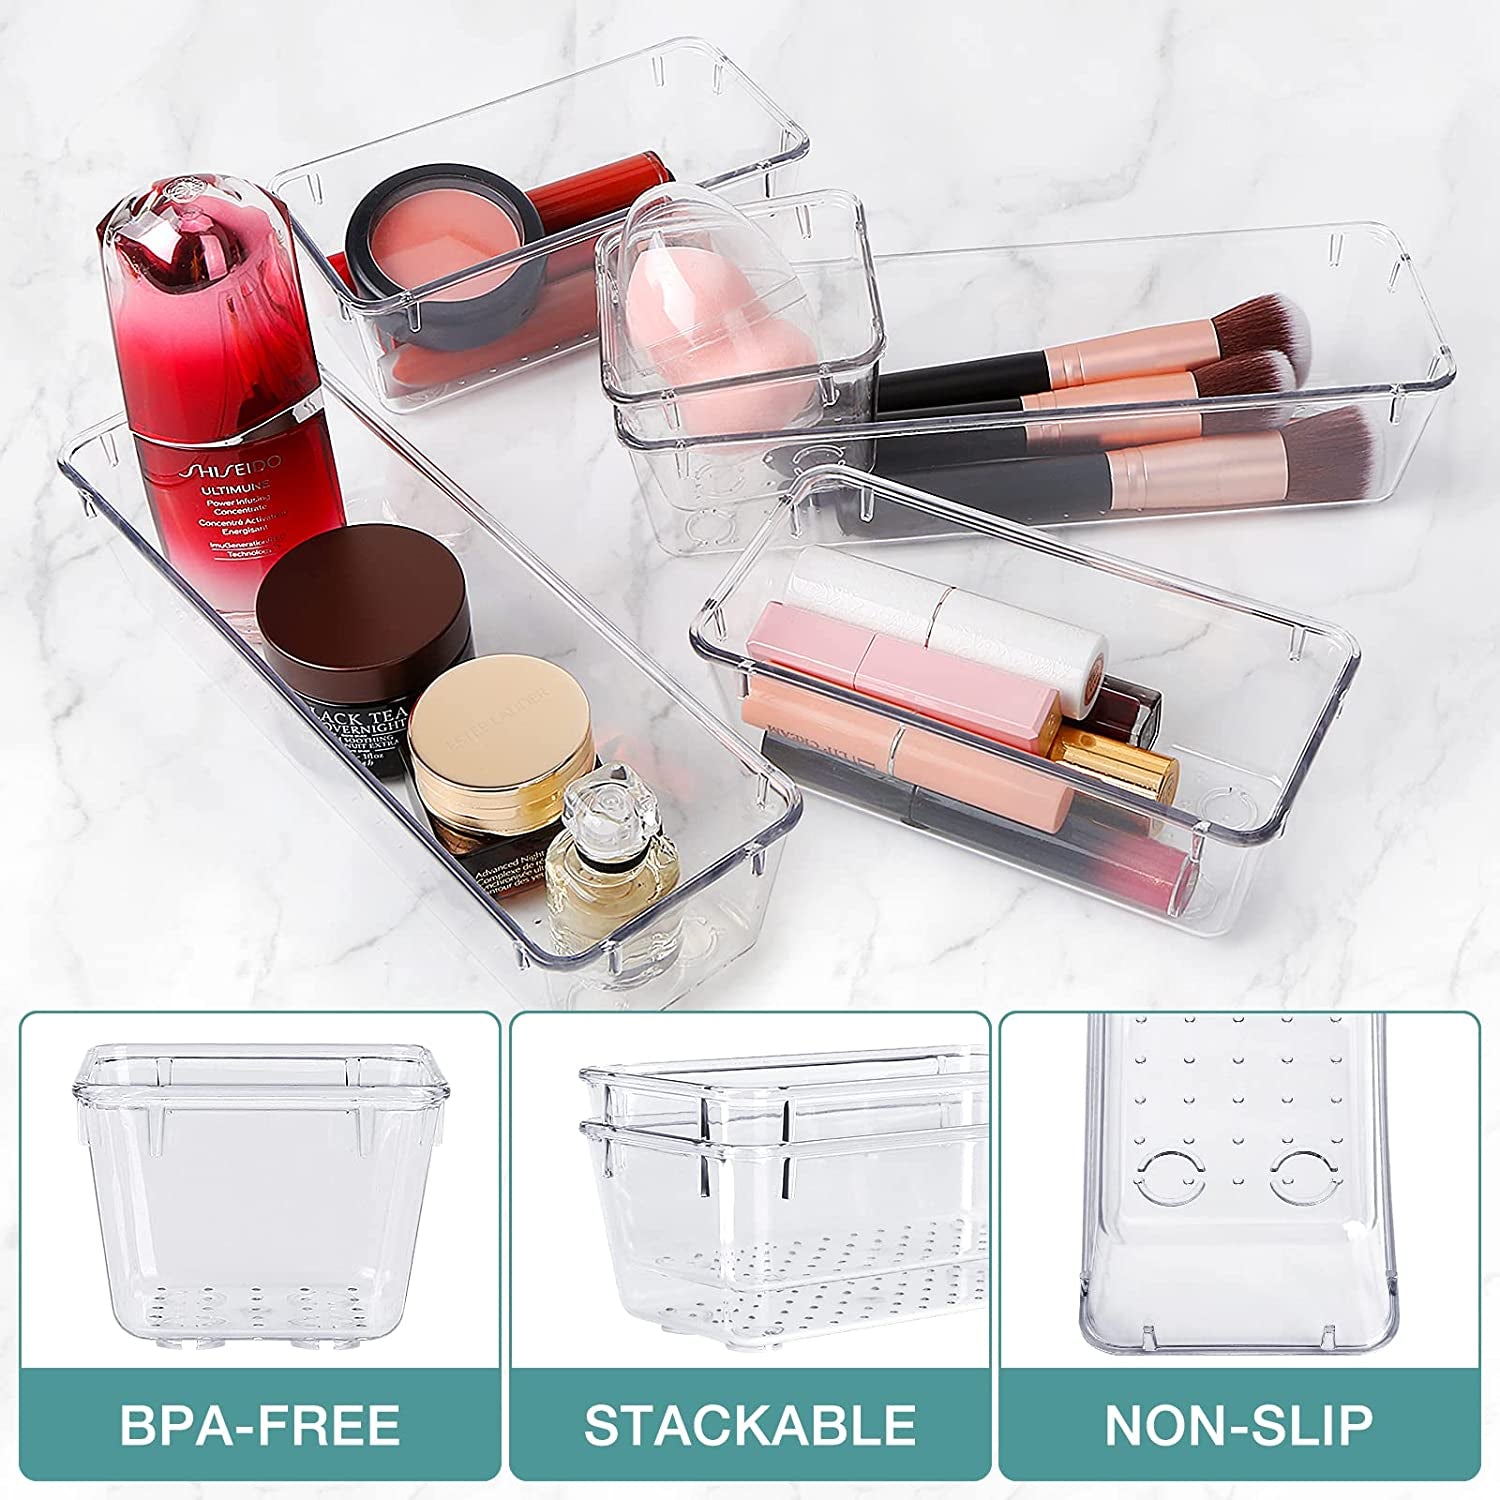 16 PCS Drawer Organizer Set, 5 Varied Size Bathroom and Kitchen Drawer Cabinet Organizer Trays, Clear Storage Bins for Makeup, Jewelry, Utensils and Gadgets